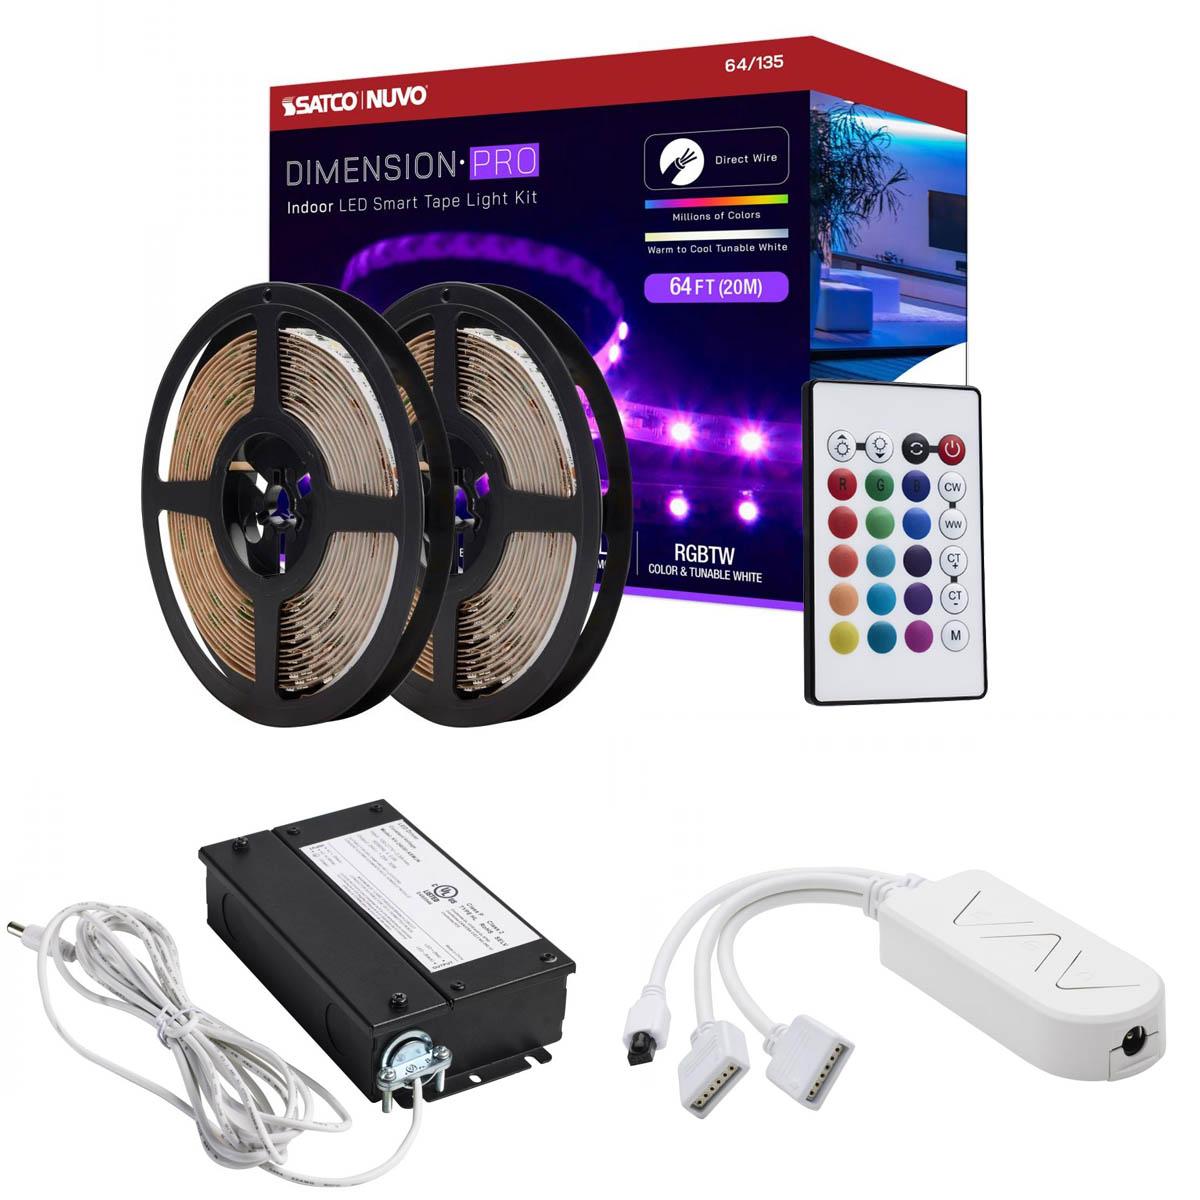 Dimension Pro LED Smart Tape Light Kit with Remote, 65ft Reel, Color Changing RGB and Tunable White, 24V, J-Box Connection